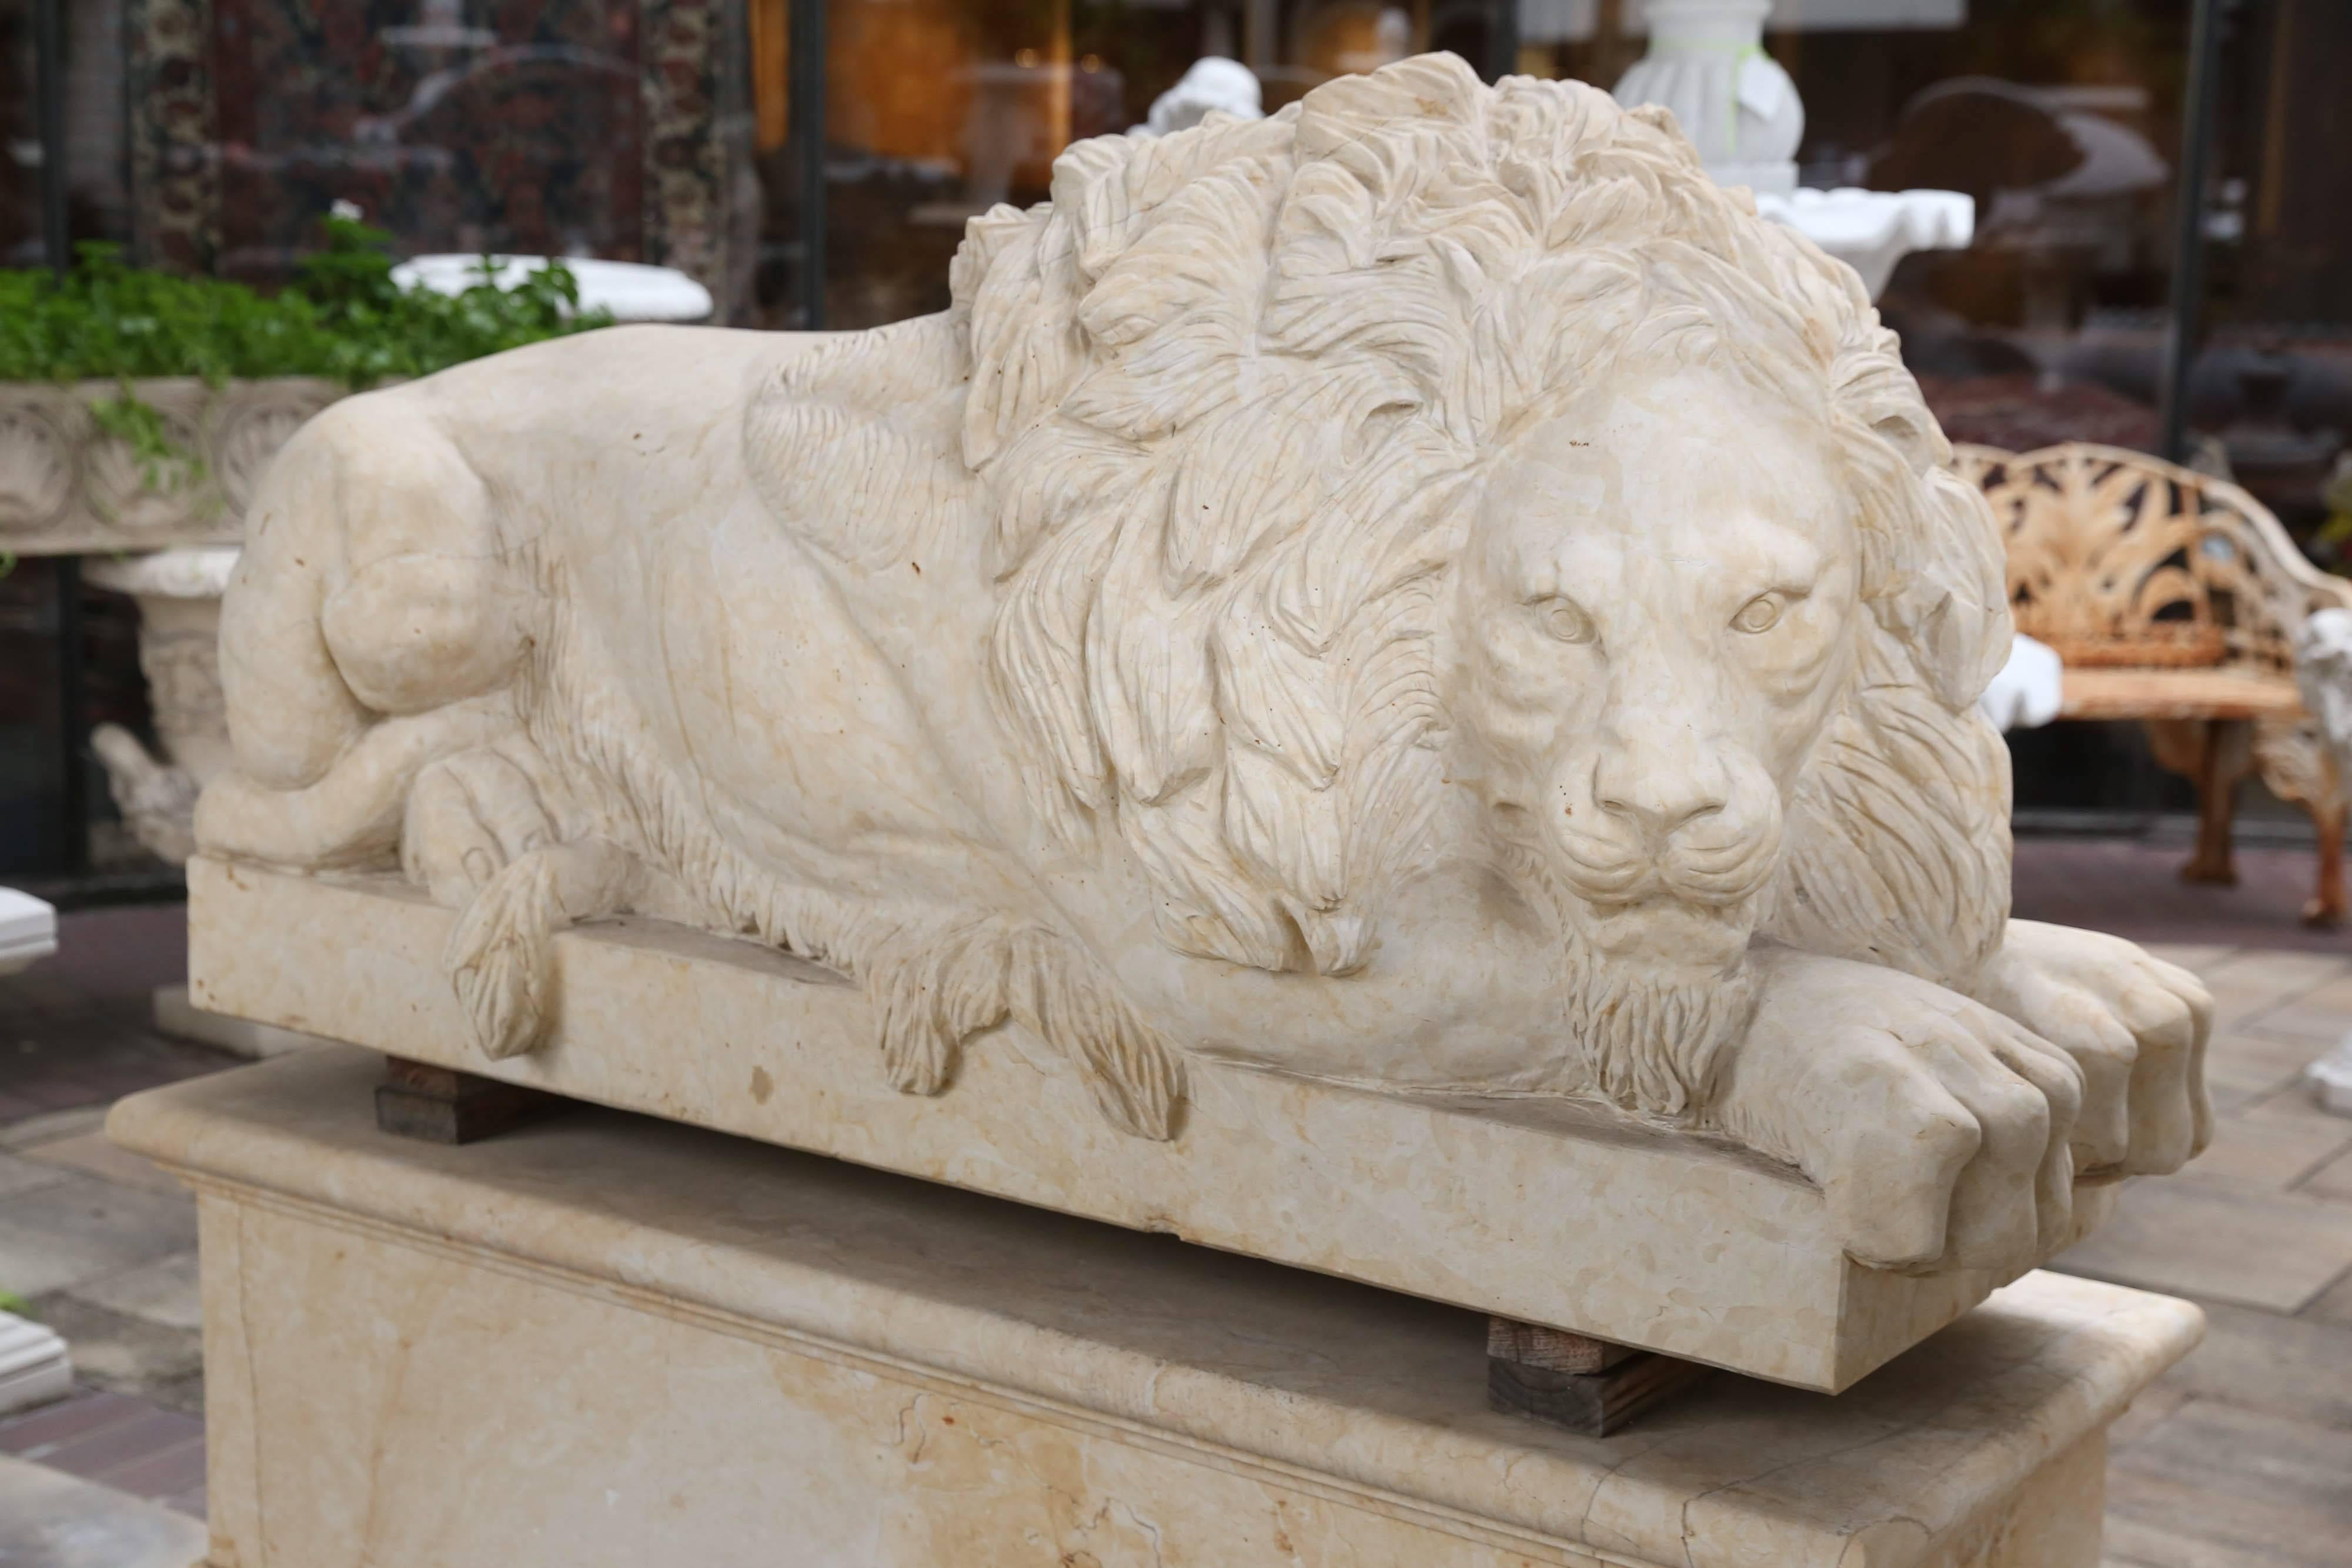 Large recumbent lions resting on solid marble pedestals. The color is a soft
cream color. Beautifully carved! They would enhance an entrance to
A large entryway or garden area. Dimensions of pedestals: 24 D by 64 W
By 20.5 in high. These are